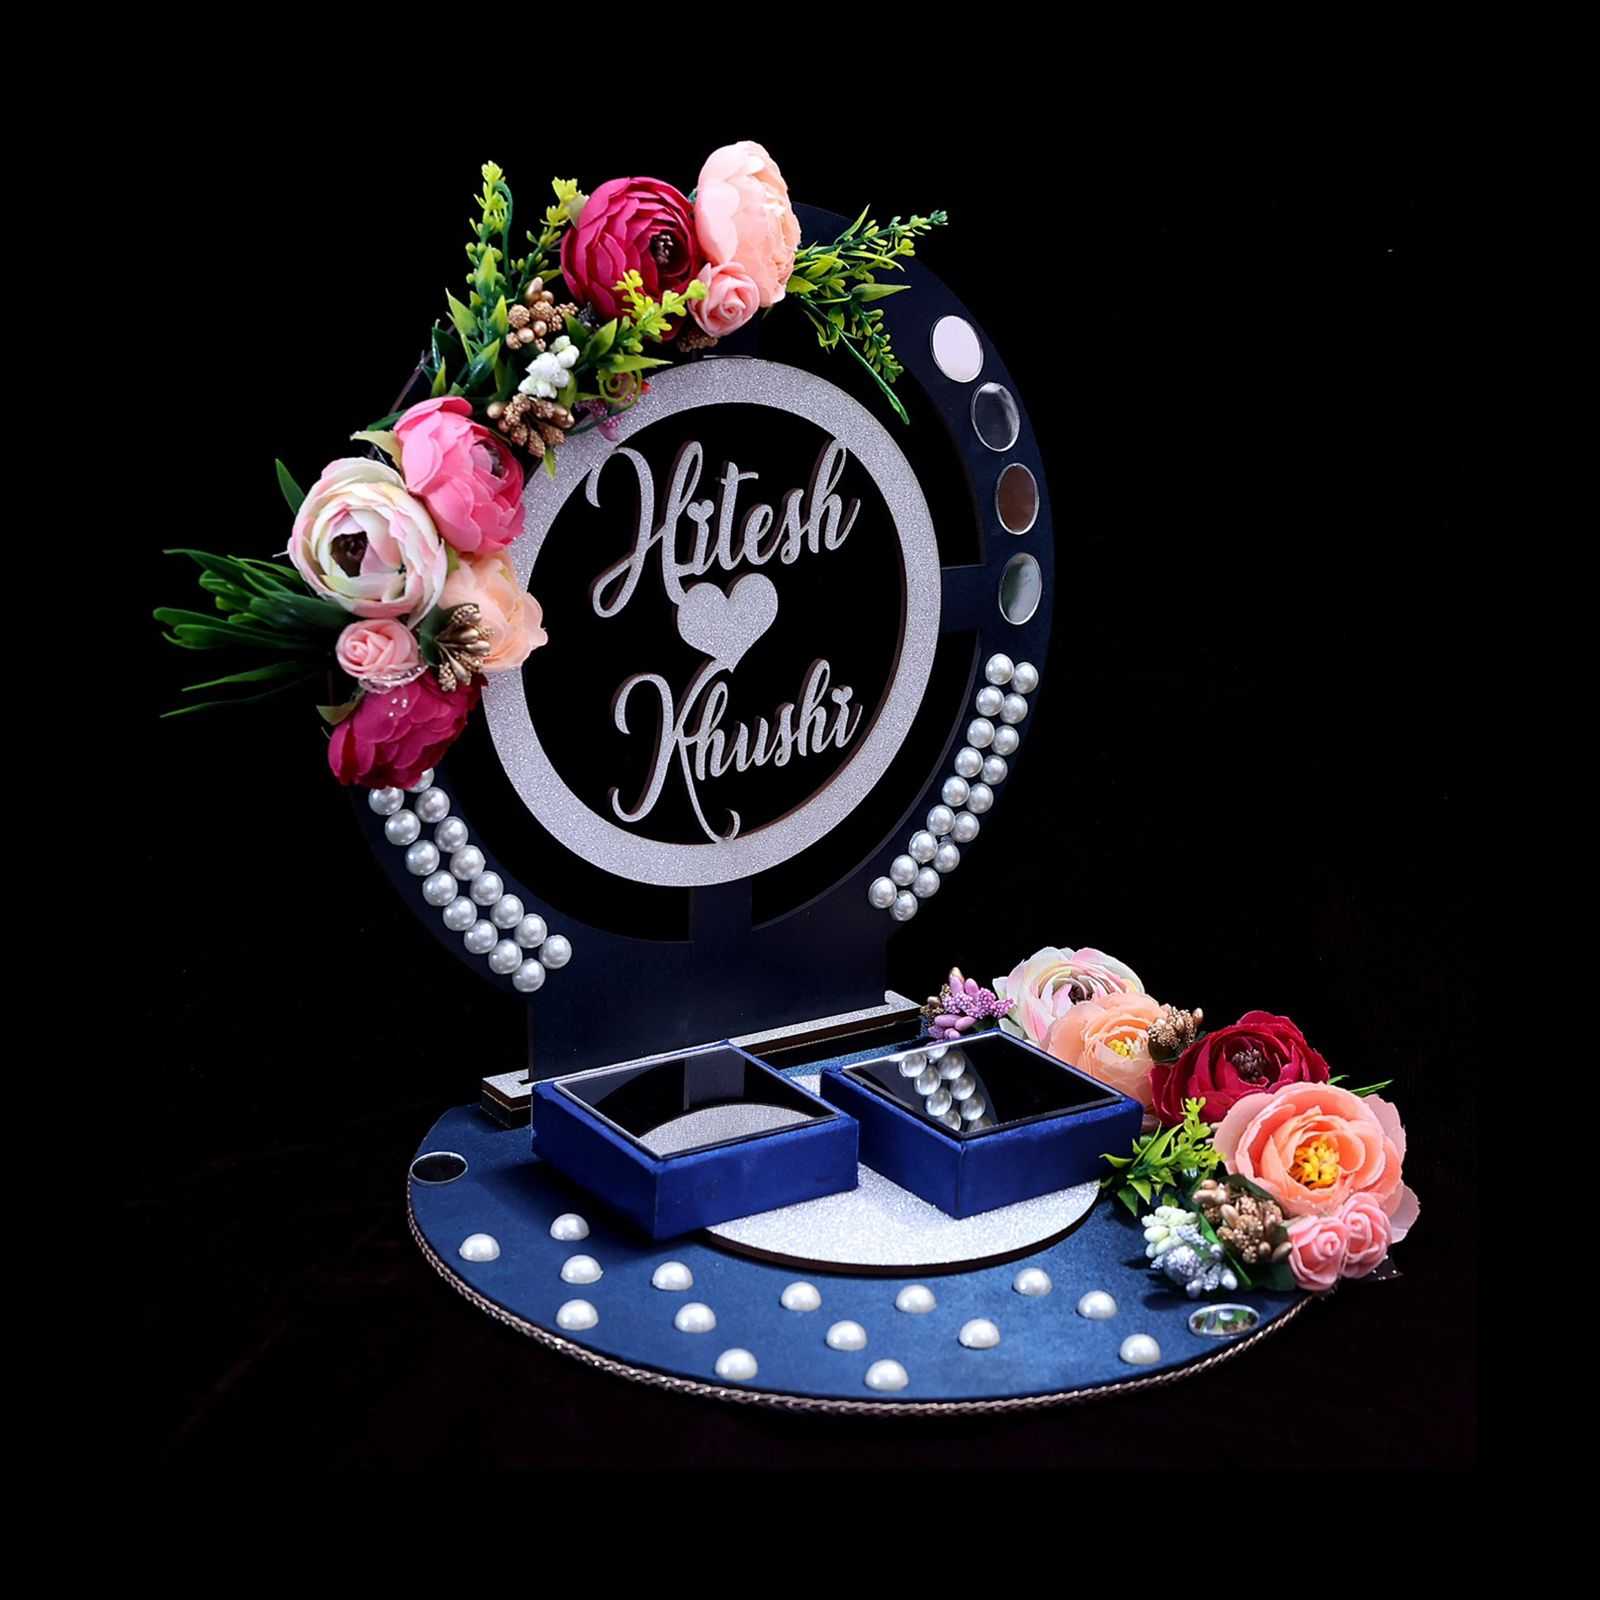 mix color Designer Ring Ceremony Tray at Rs 3200 in Delhi | ID: 3027540212